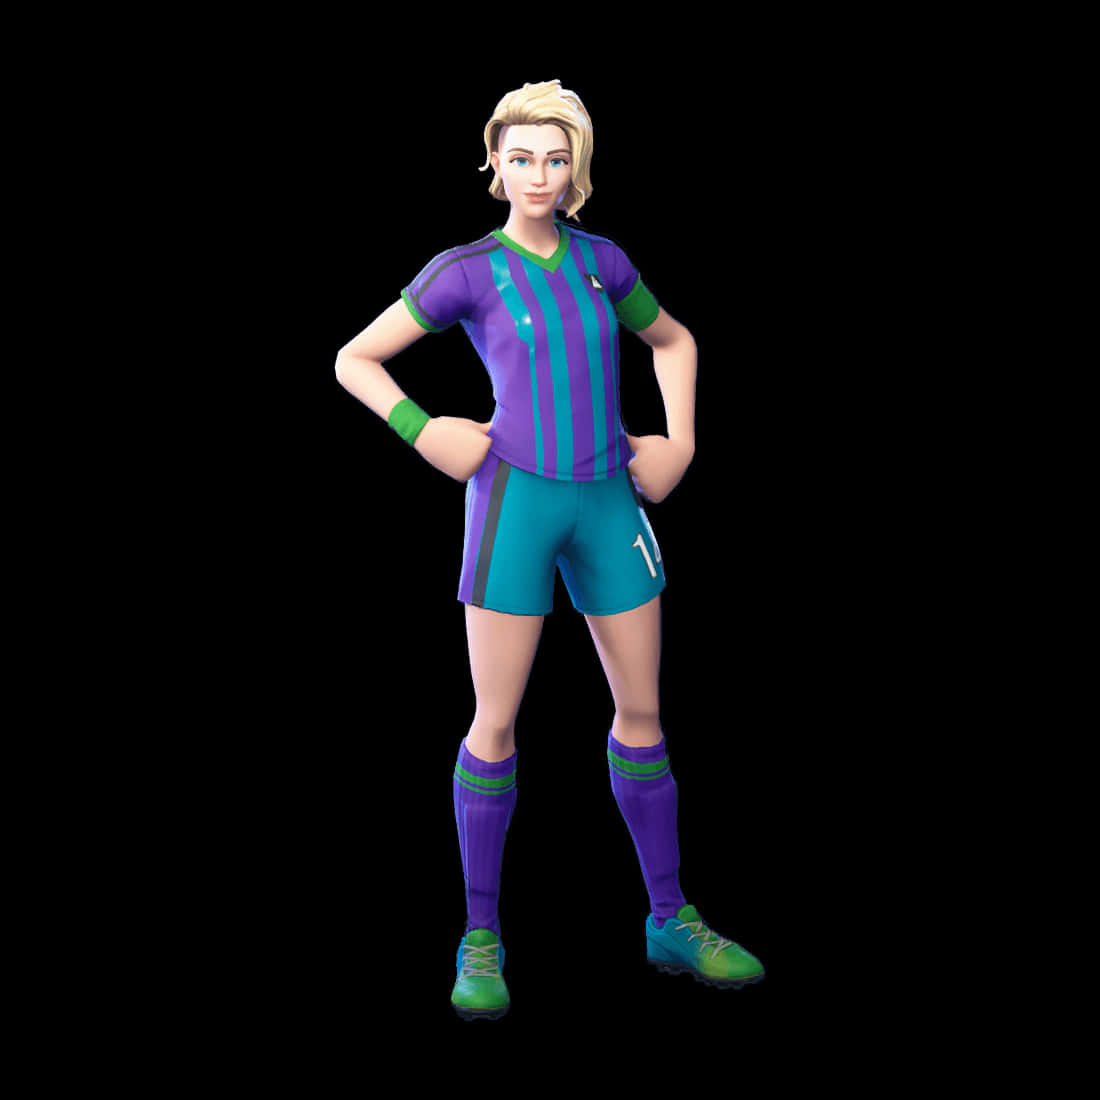 The stylish and competitive Fortnite Soccer Skin Wallpaper